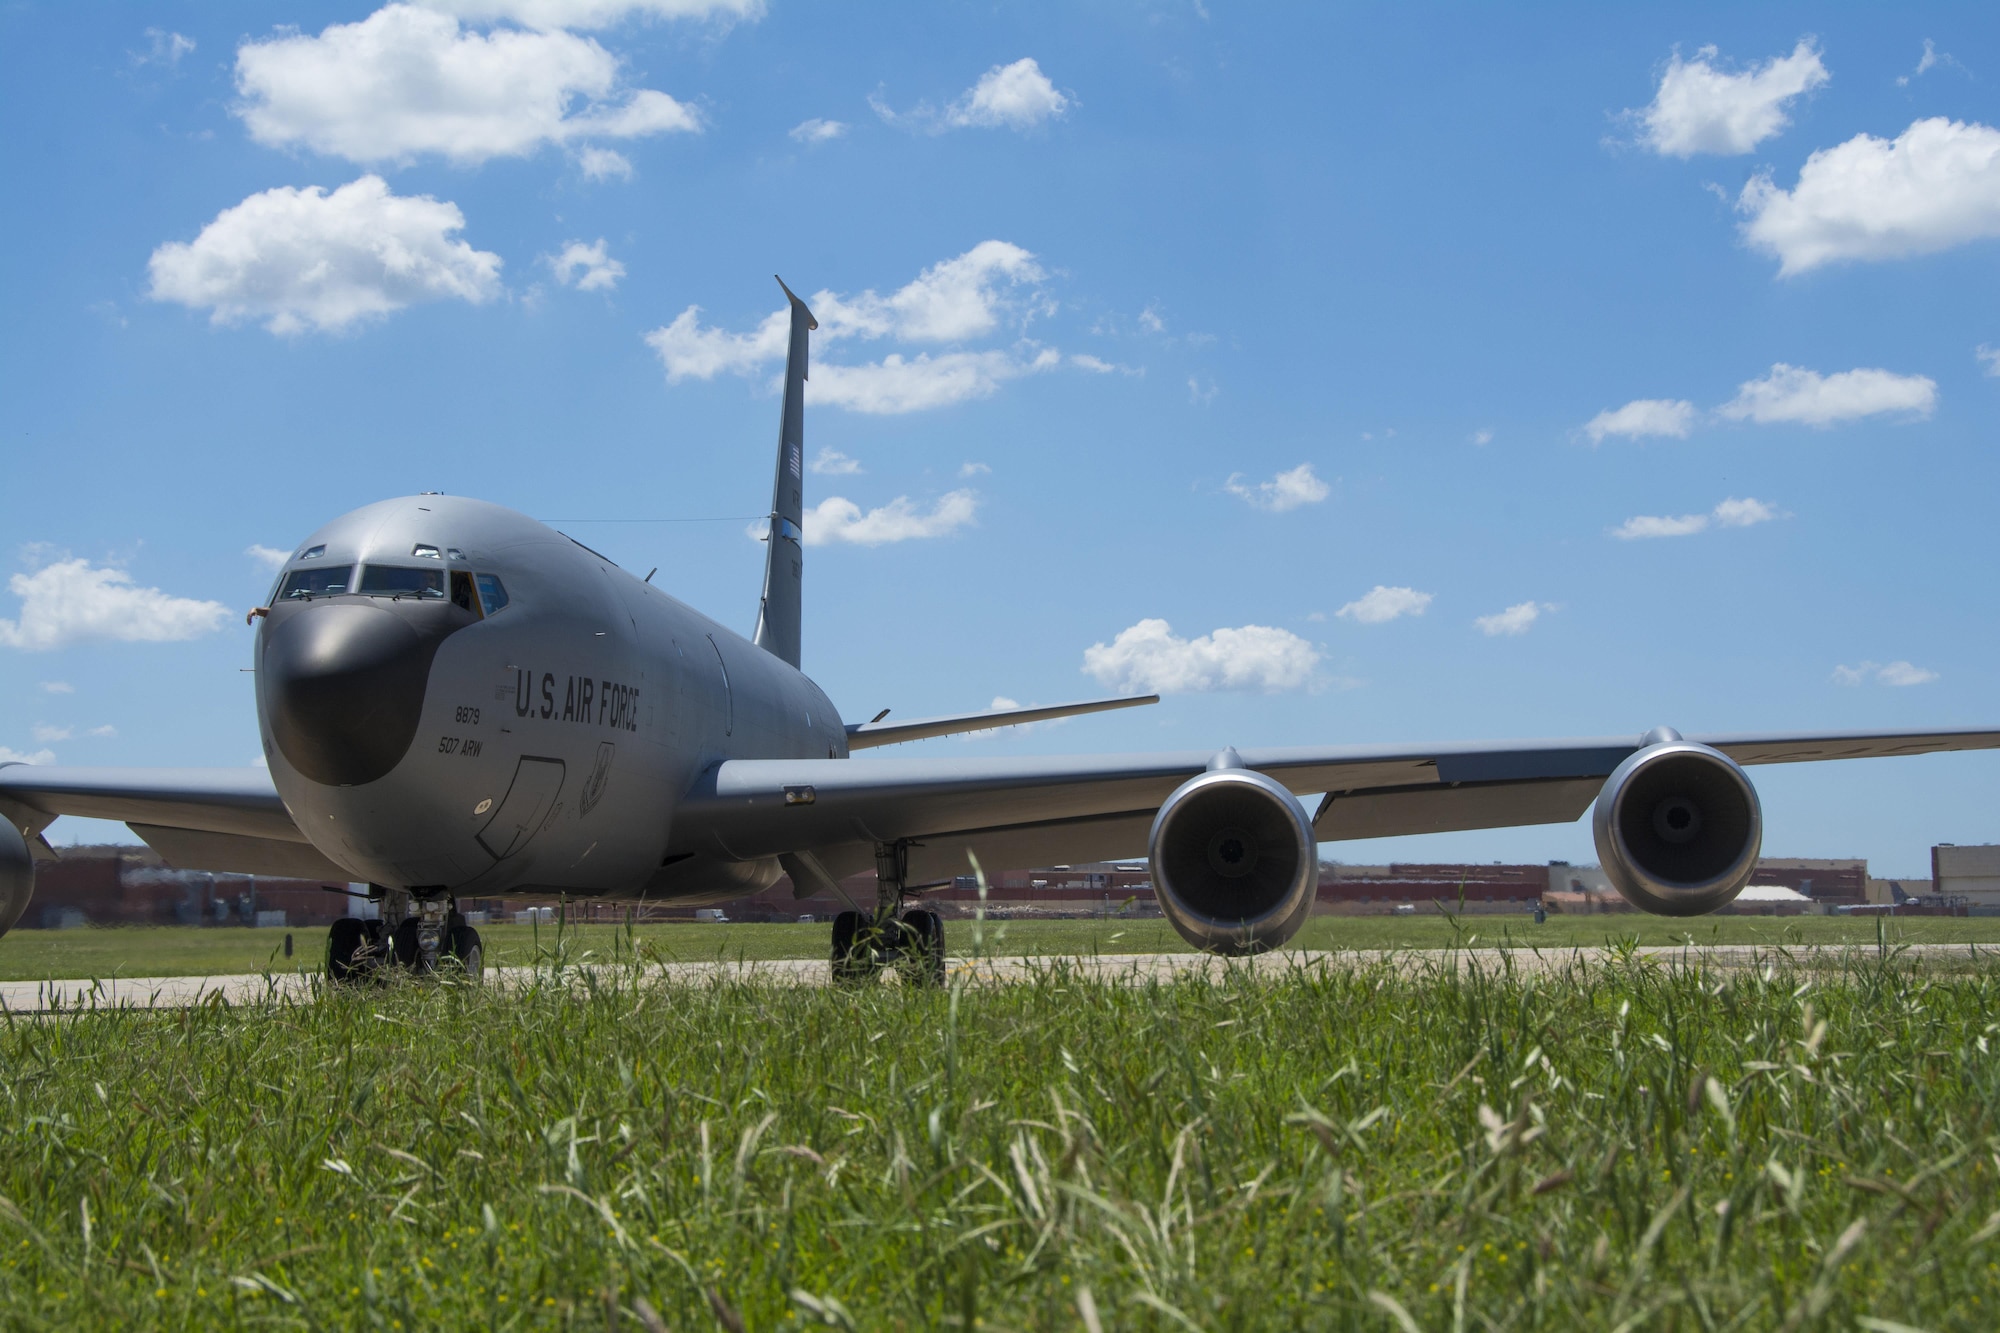 An 507th Air Refueling Wing KC-135 Stratotanker alert aircraft taxis from one ramp to another to accommodate for shifting winds during the June Operational Exercise 16 at Tinker AFB, Okla. JOE 16 areas of inspection included maintaining aircraft, securing critical assets, processing personnel and cargo, responding to and launching alert aircraft, running command post operations, and many other critical tasks. (U.S. Air Force Photo/Master Sgt. Grady Epperly)